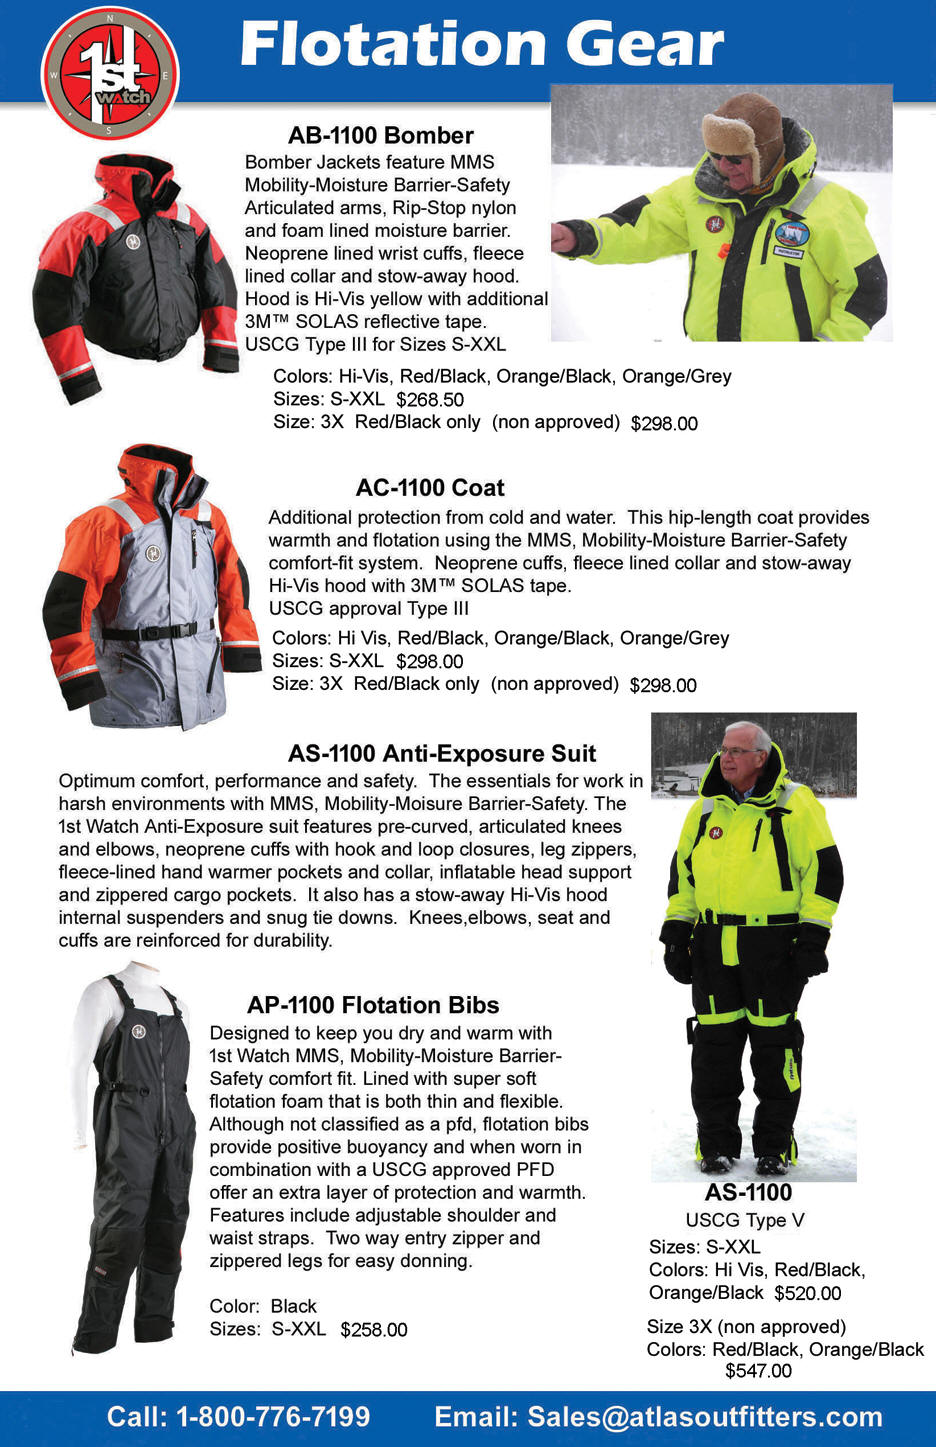 First Watch flotation coat, jacket, bibs and worksuit